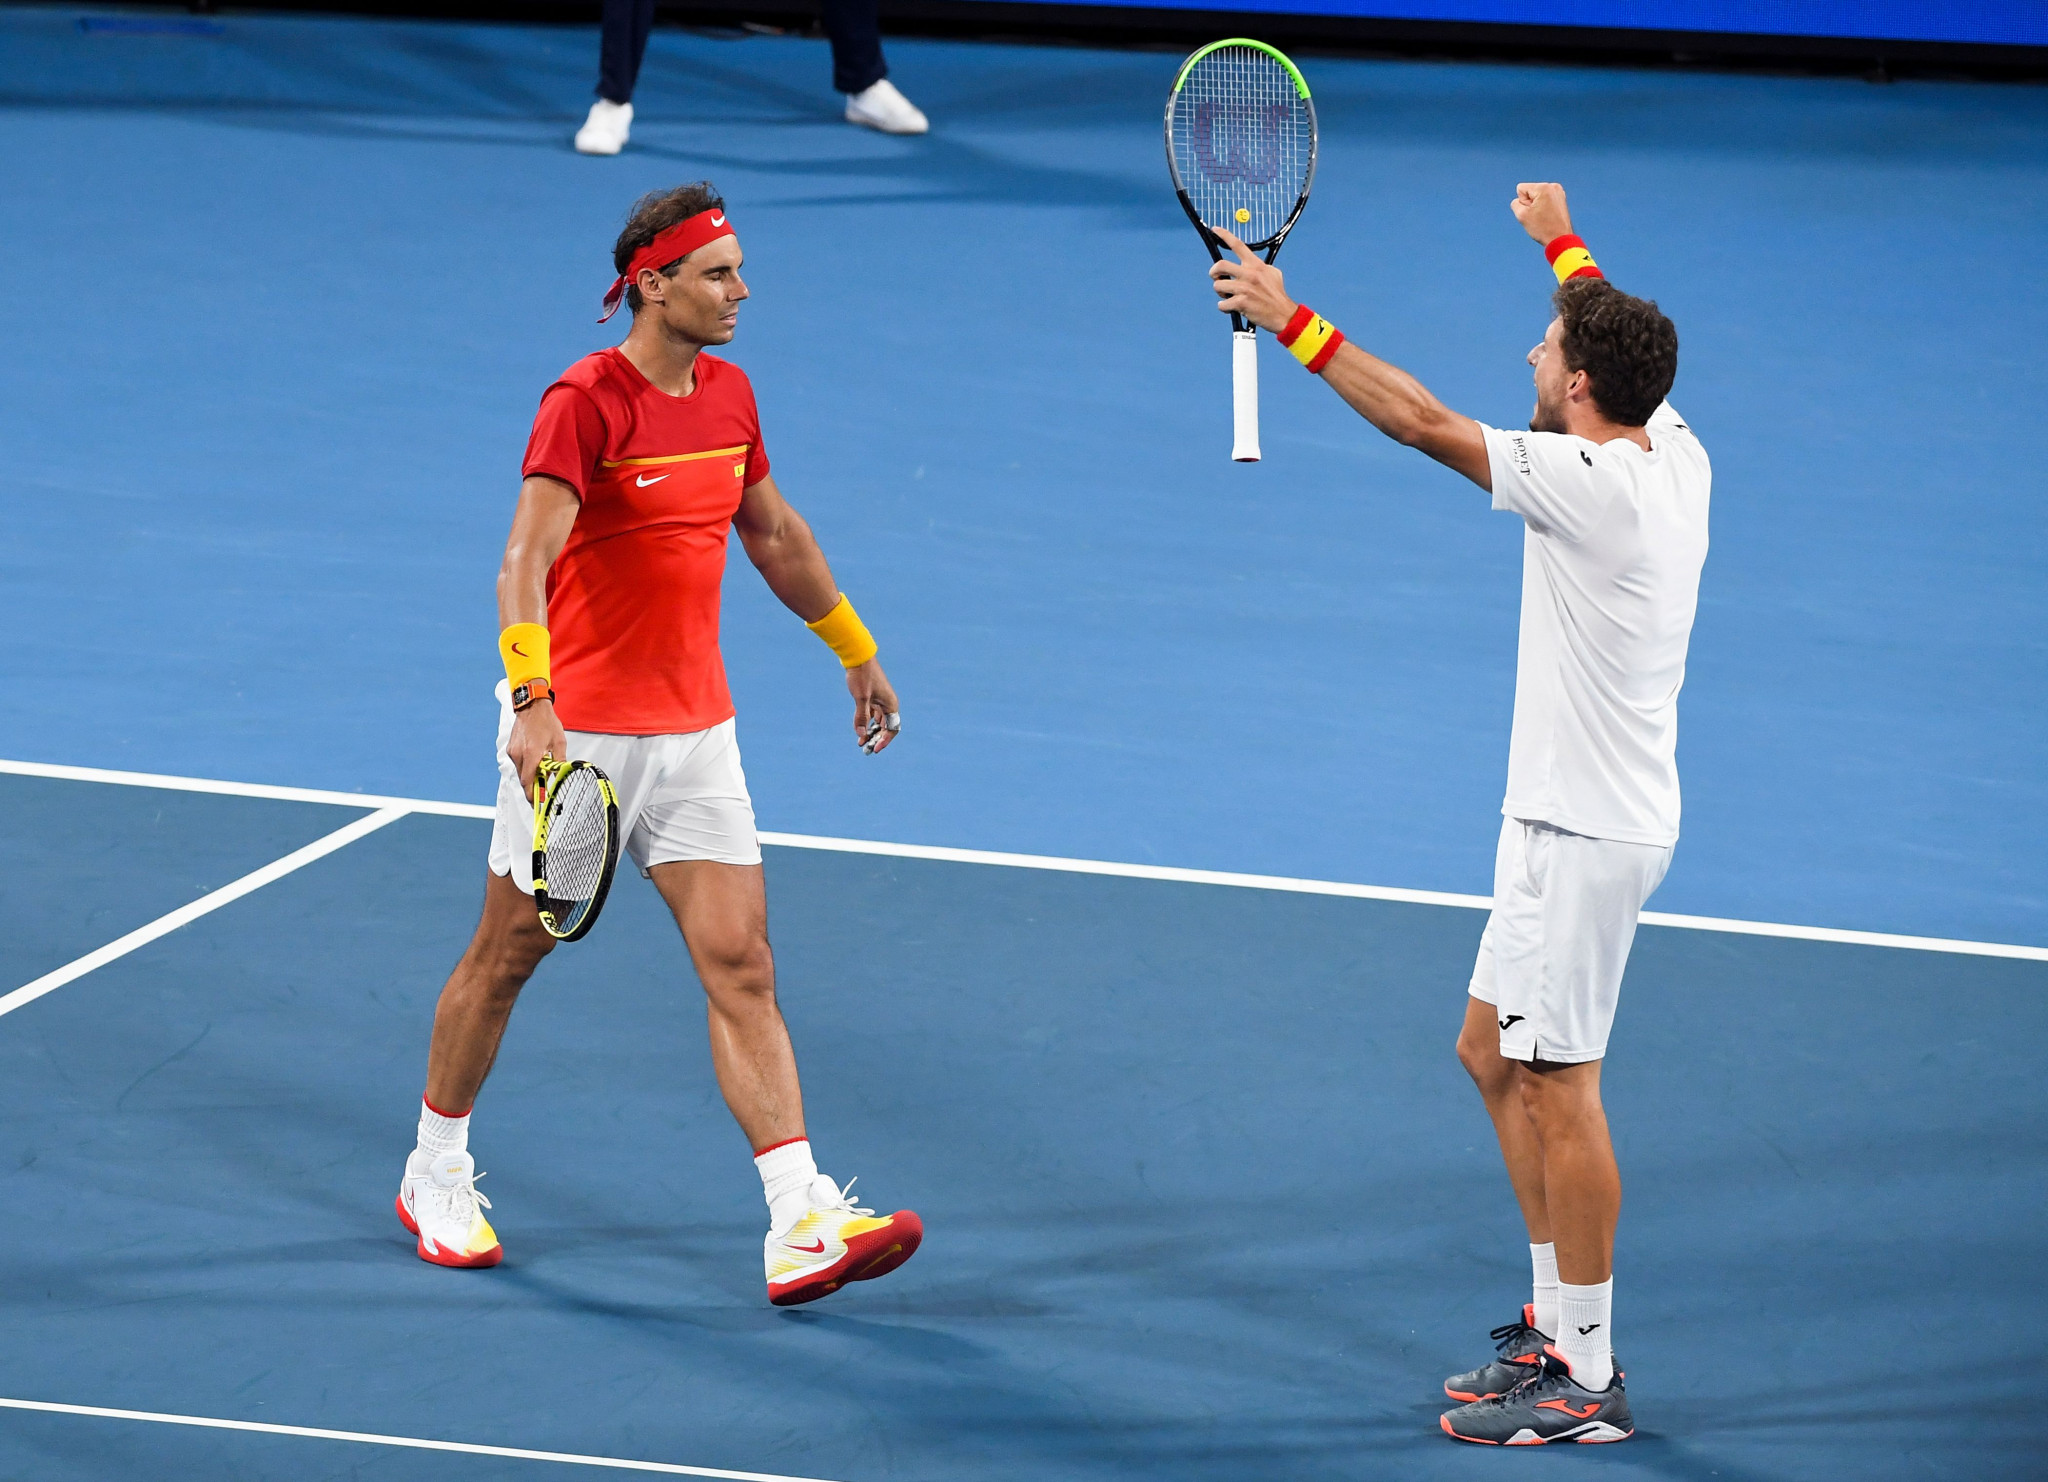 Nadal is loser then winner as Spain triumph in epic ATP Cup match against Belgium